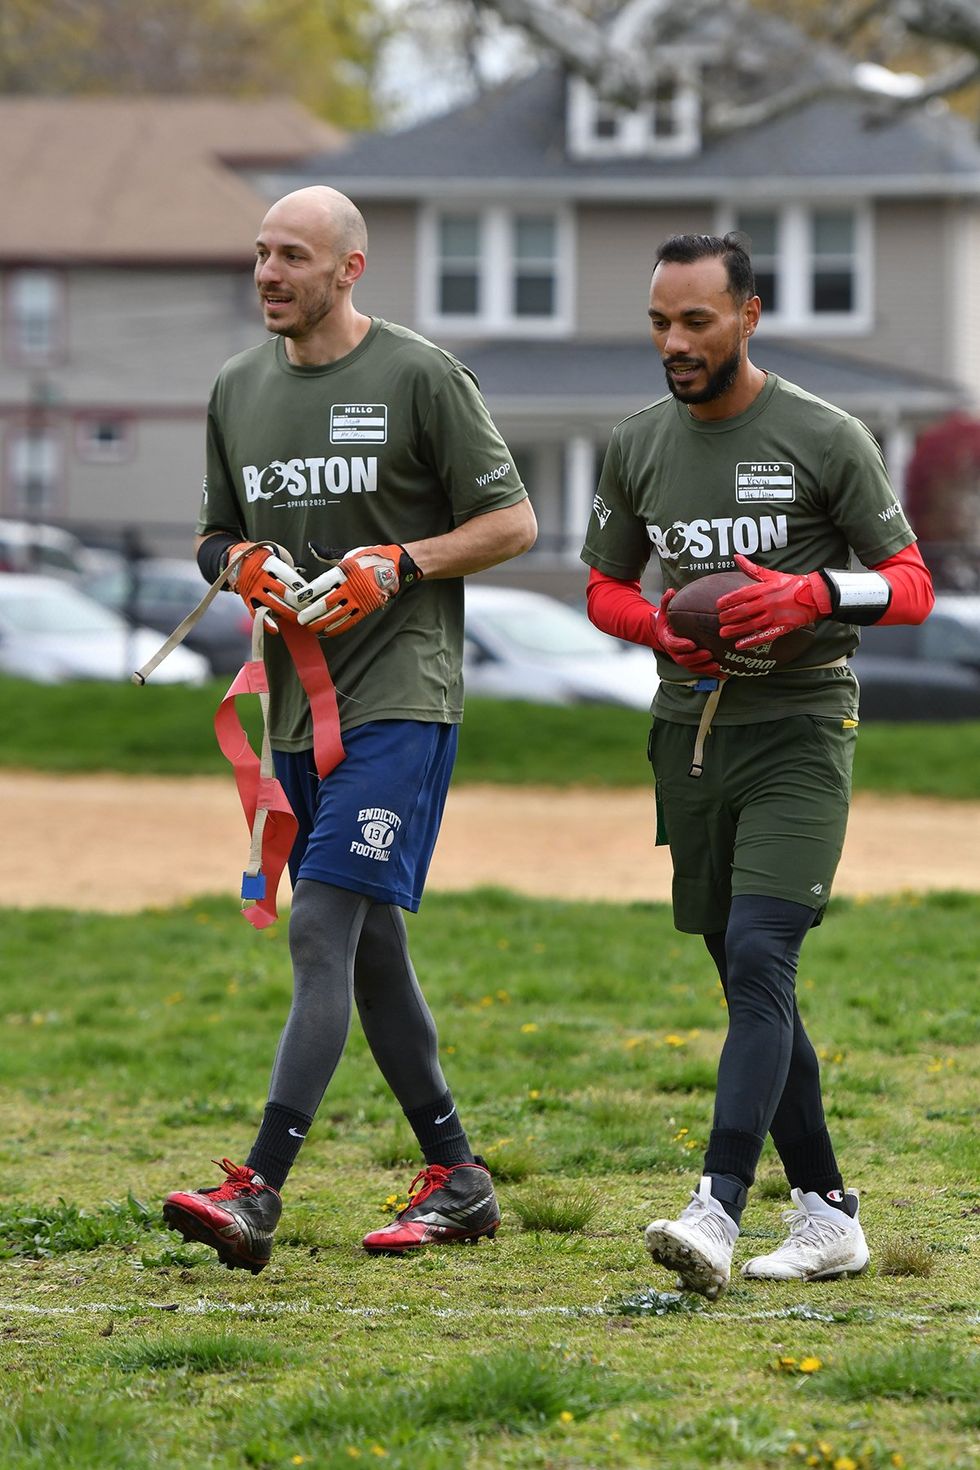 Kevin Davila (left) and teammate during a recent game